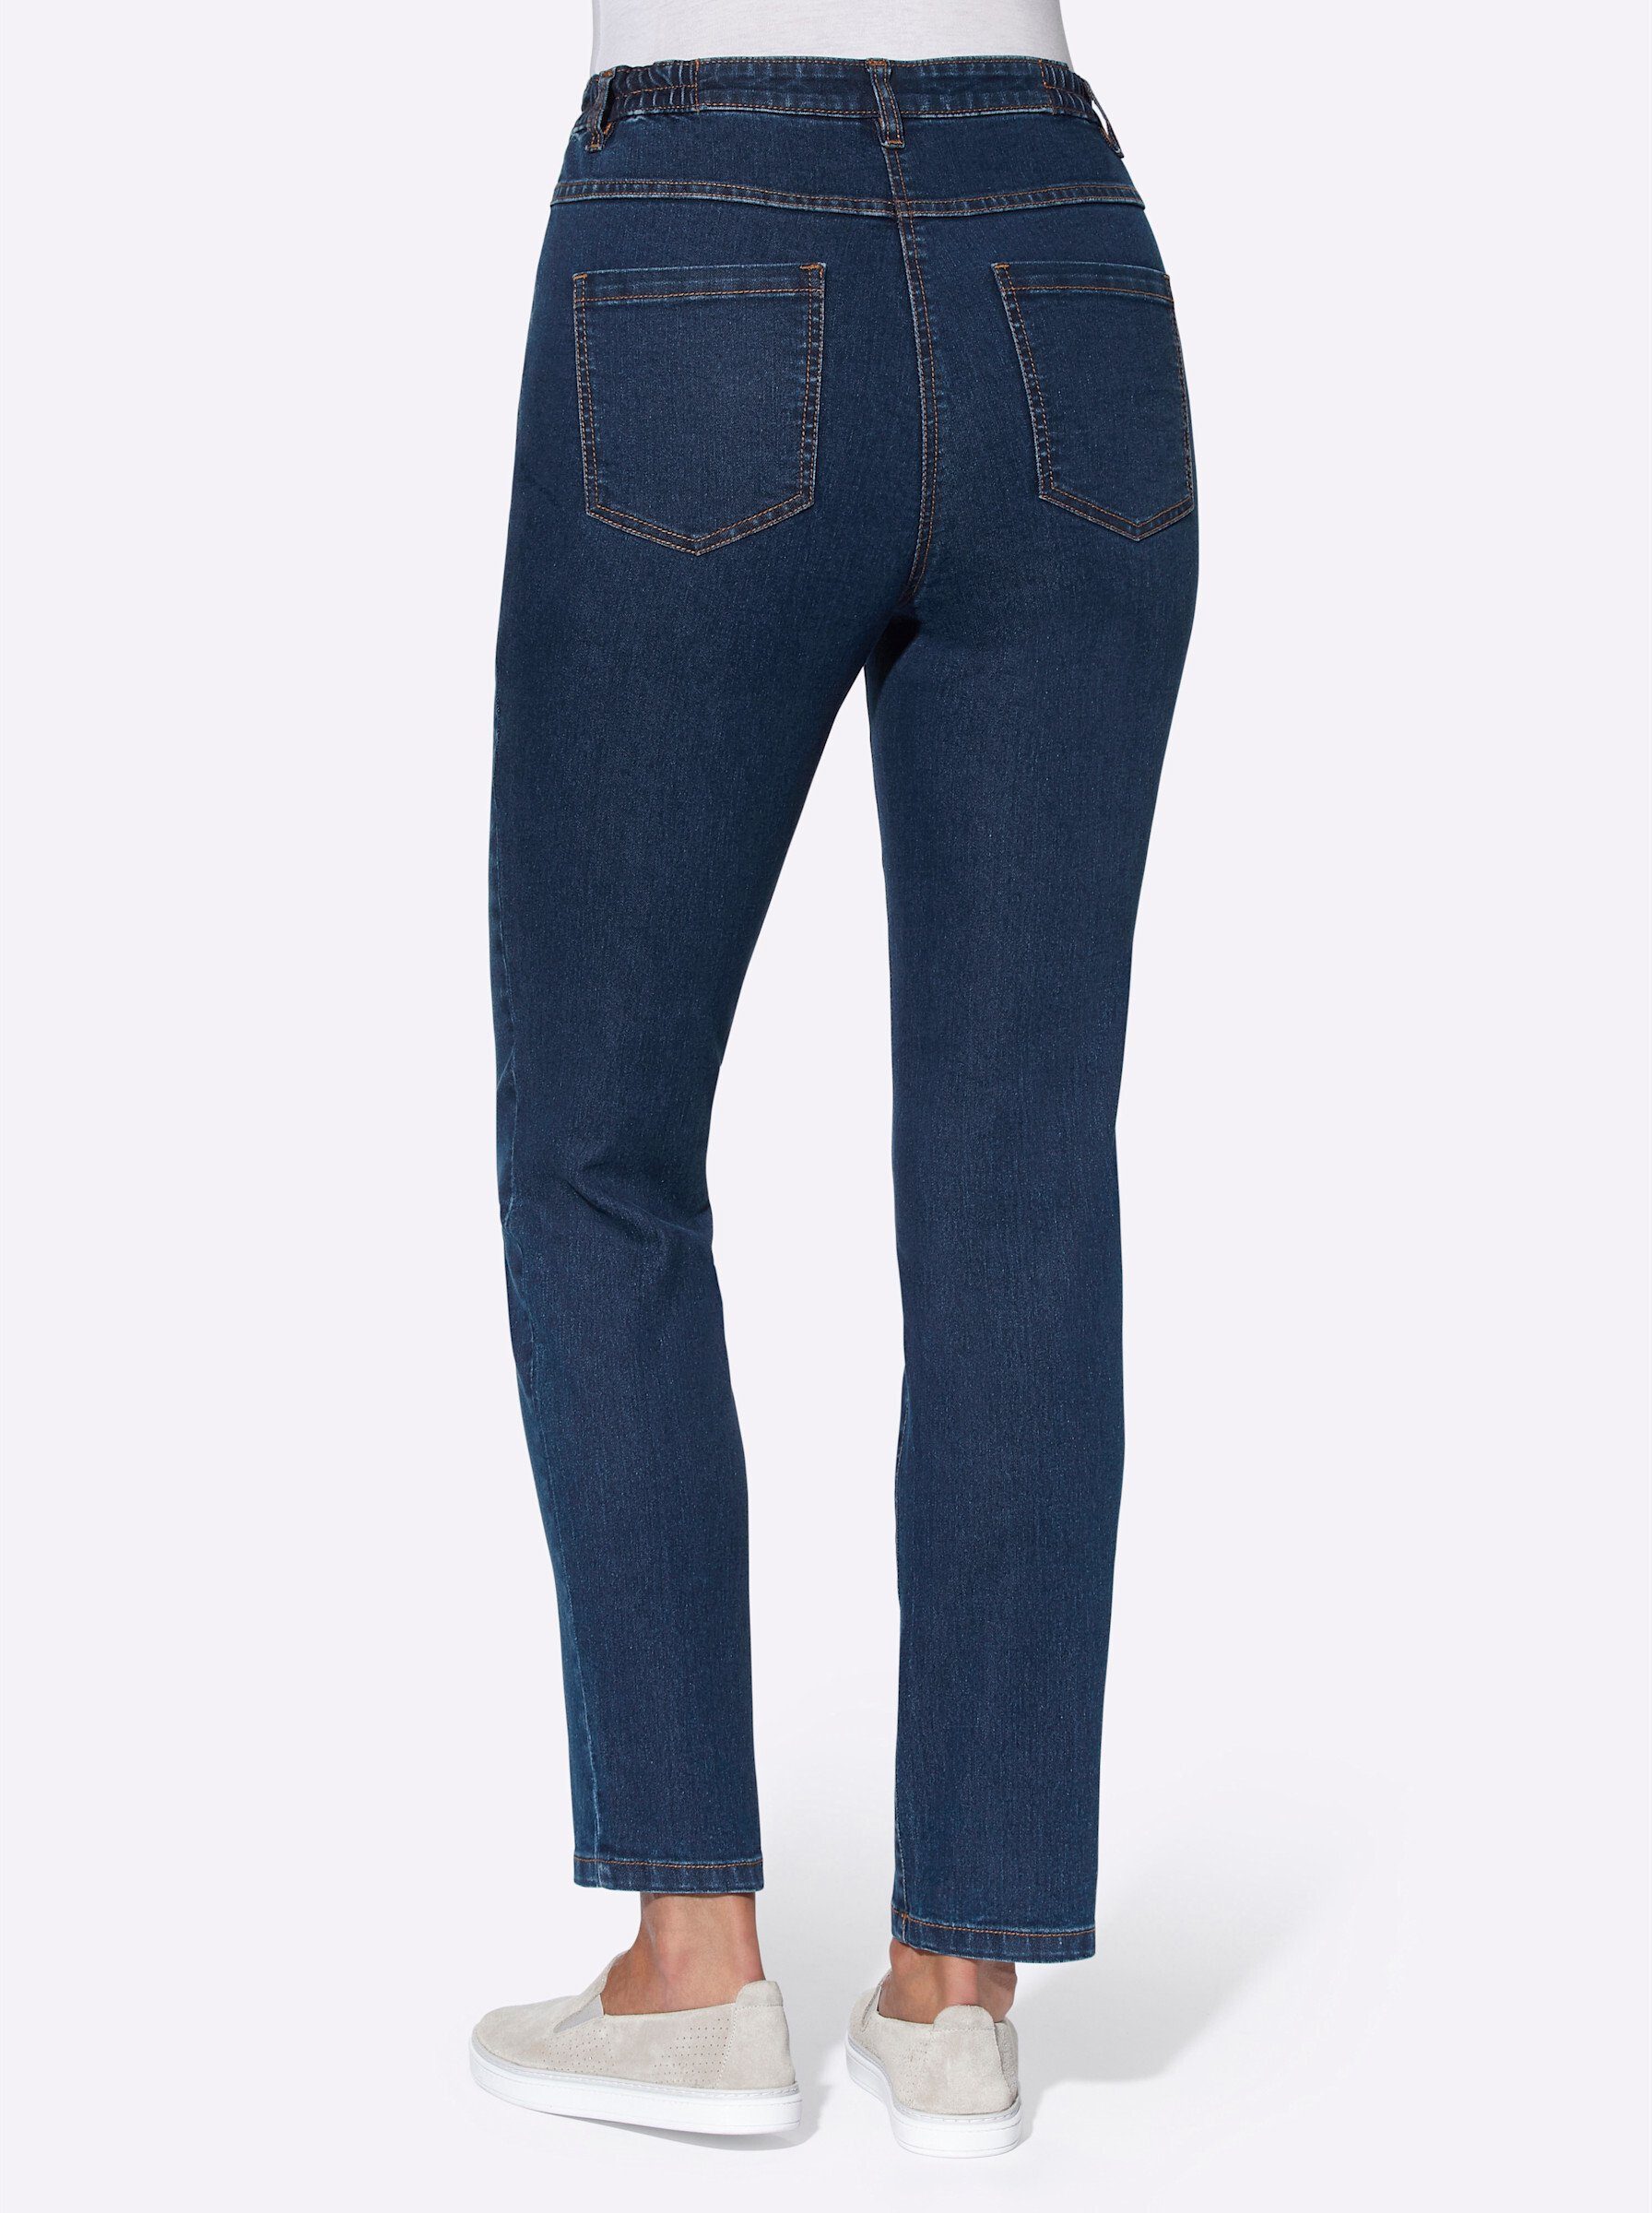 Jeans blue-stone-washed an! Bequeme Sieh